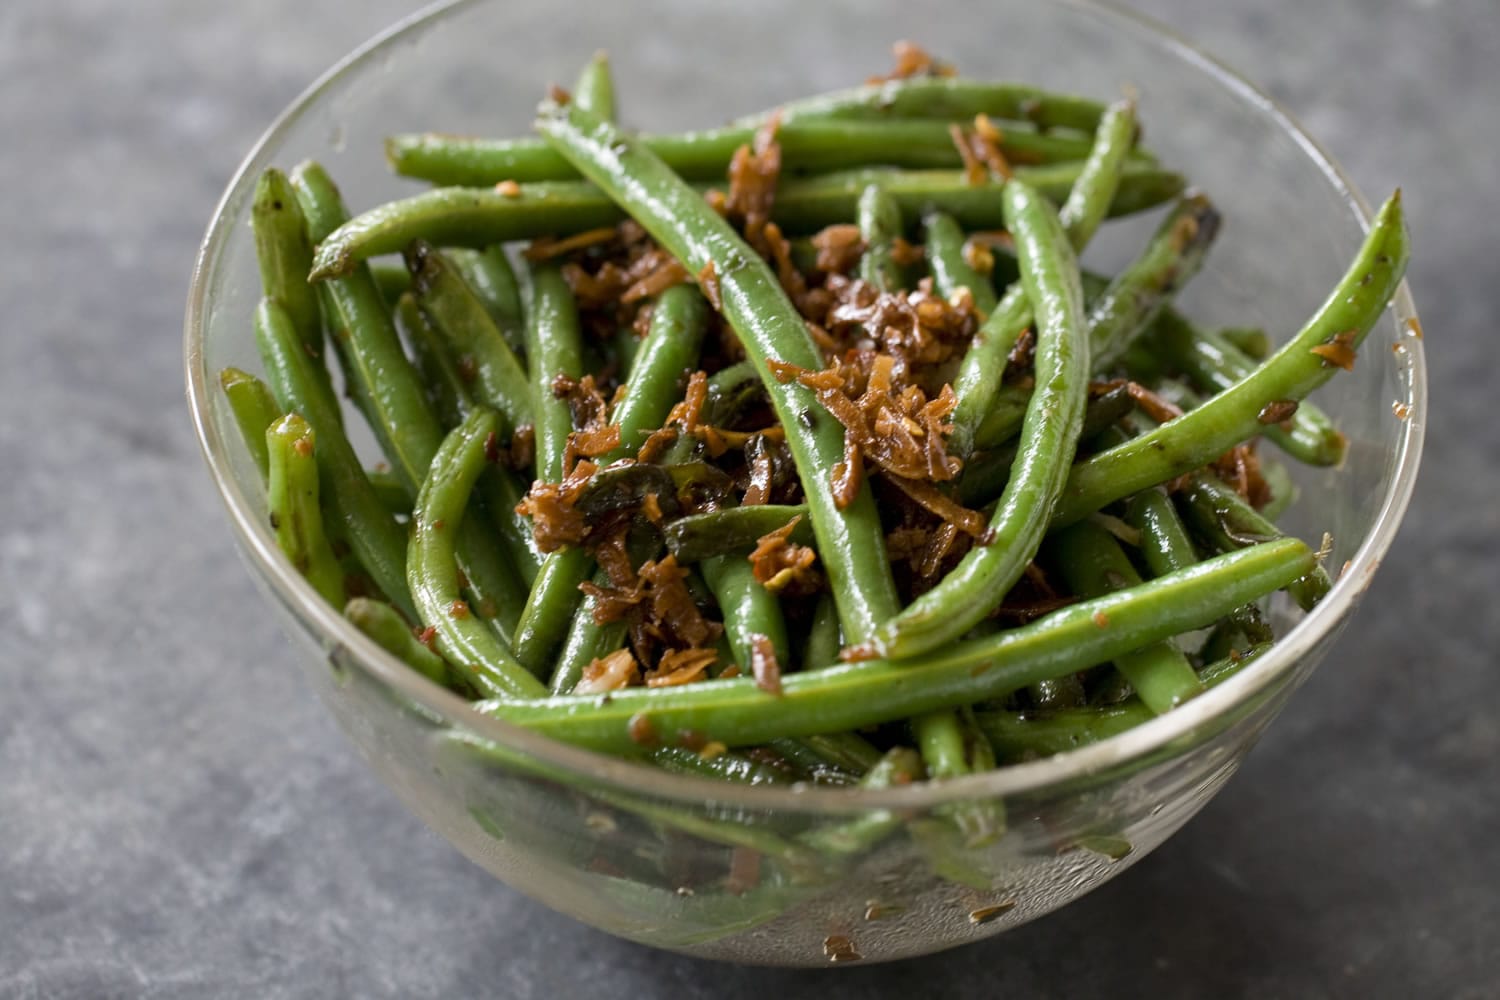 Green beans with a sweet and spicy coconut topping